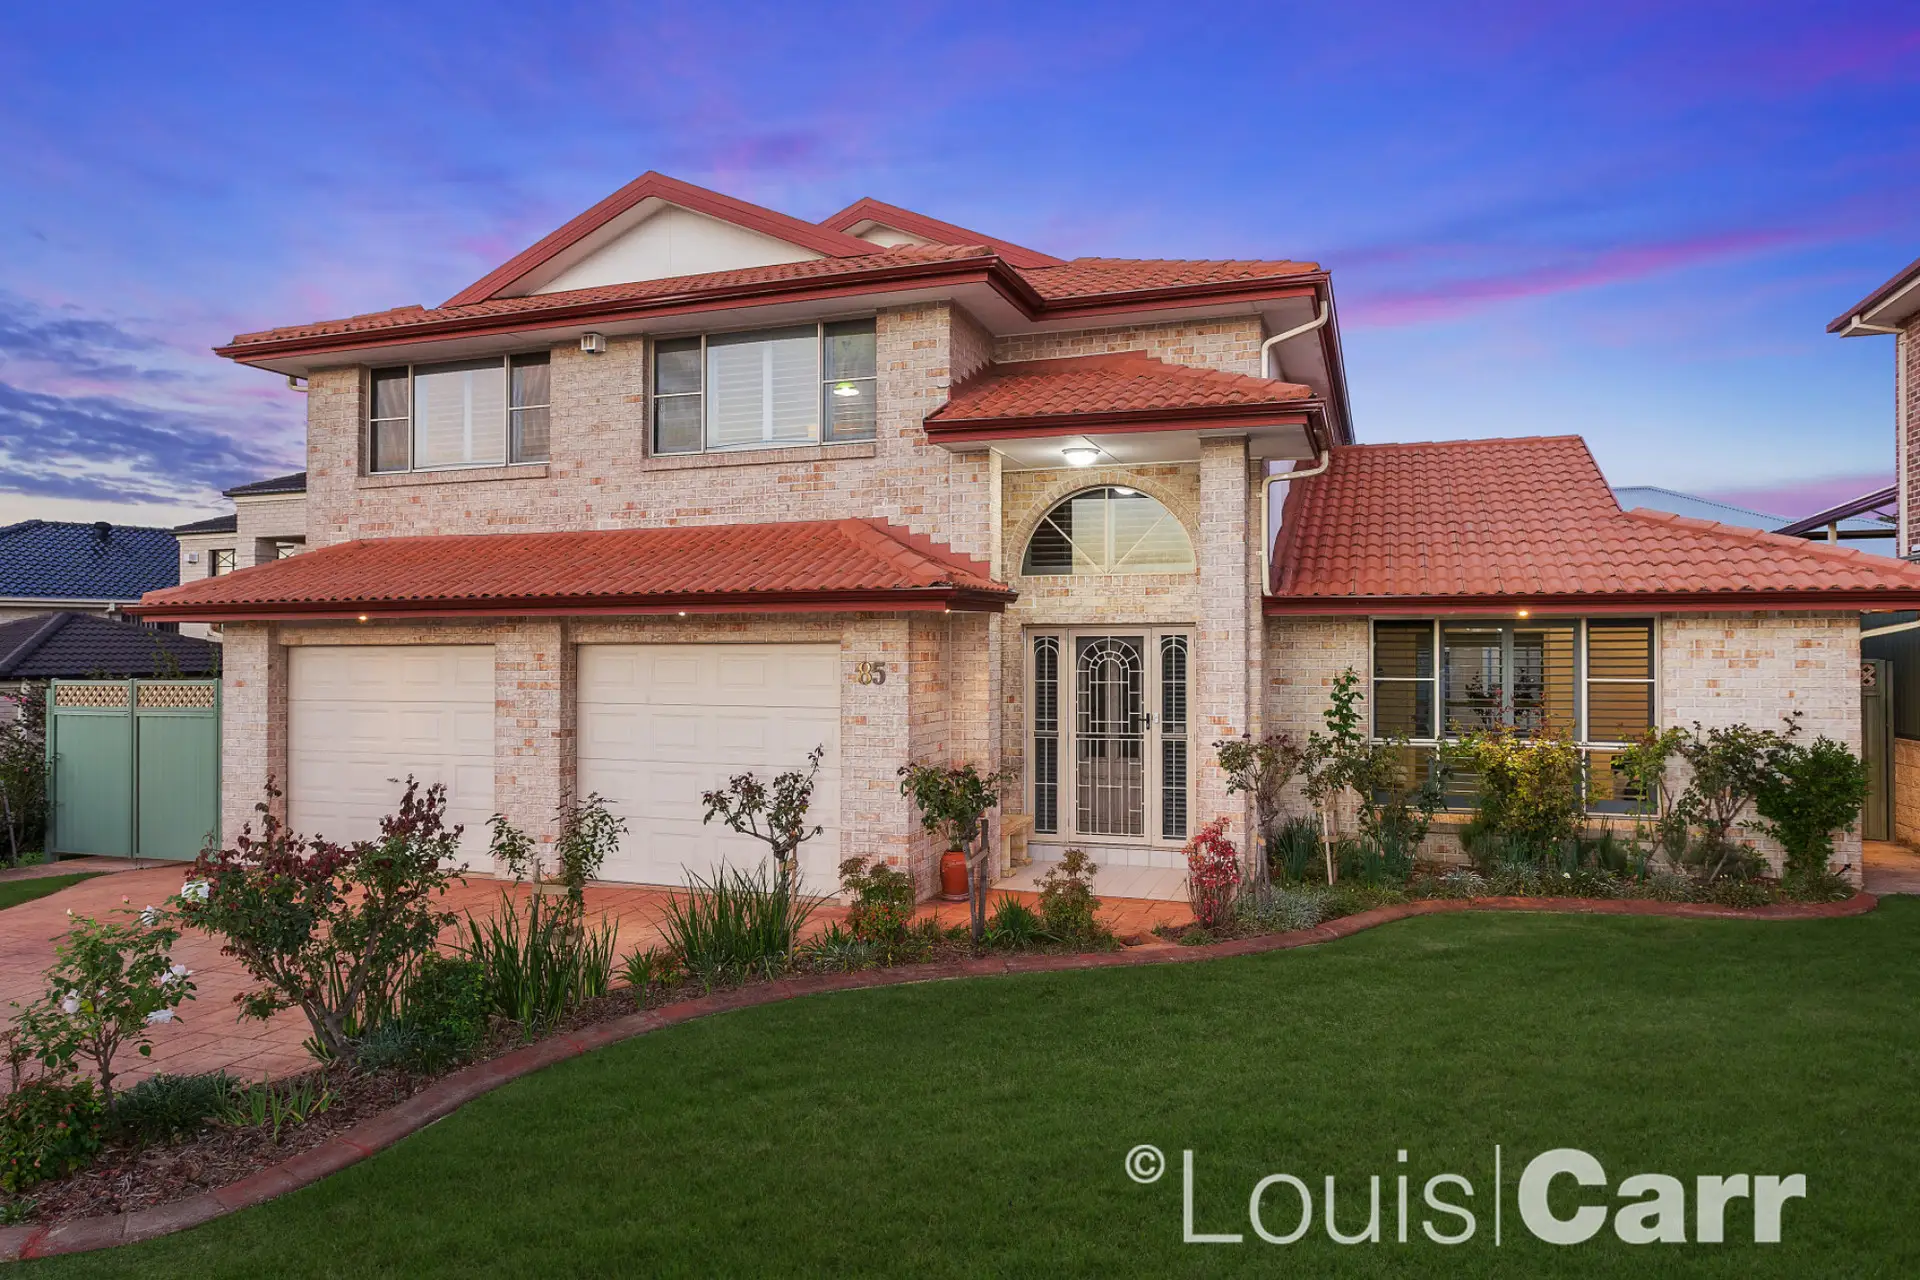 Photo #1: 85 Poole Road, Kellyville - Sold by Louis Carr Real Estate